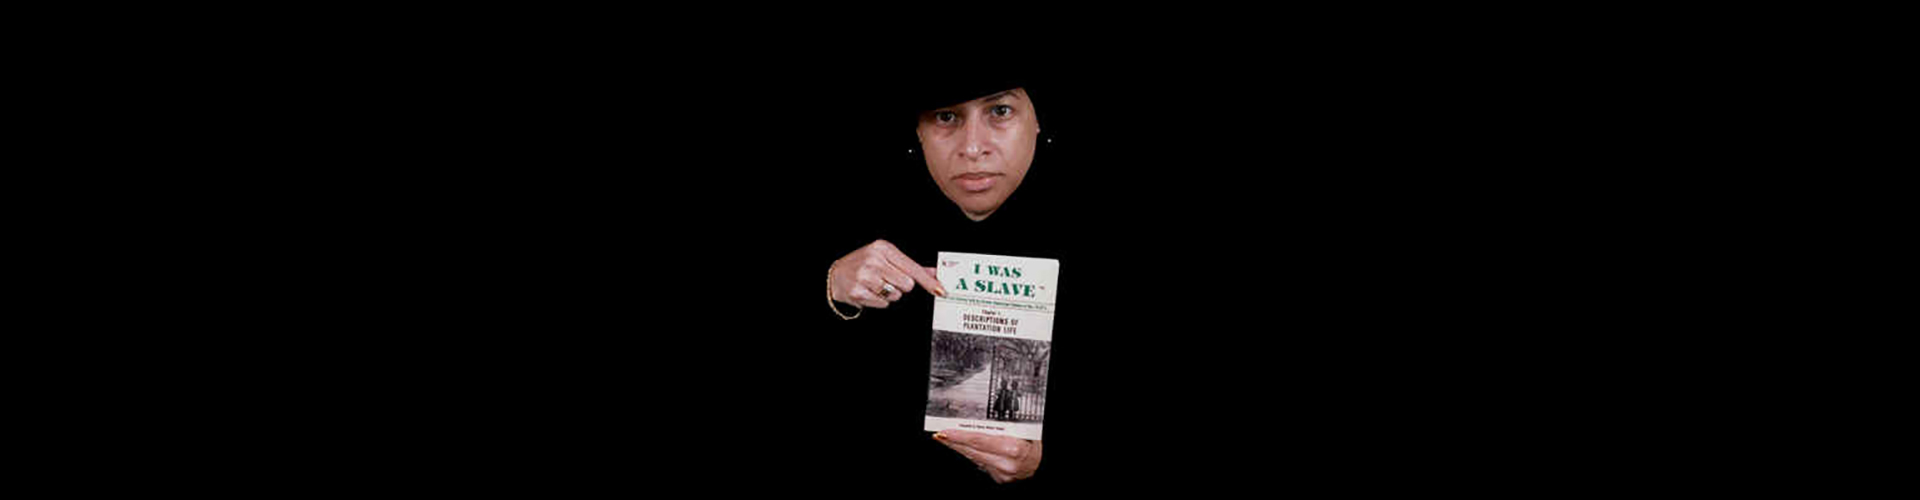 Compiler Donna Wyant Howell holding a copy of I WAS A SLAVE books